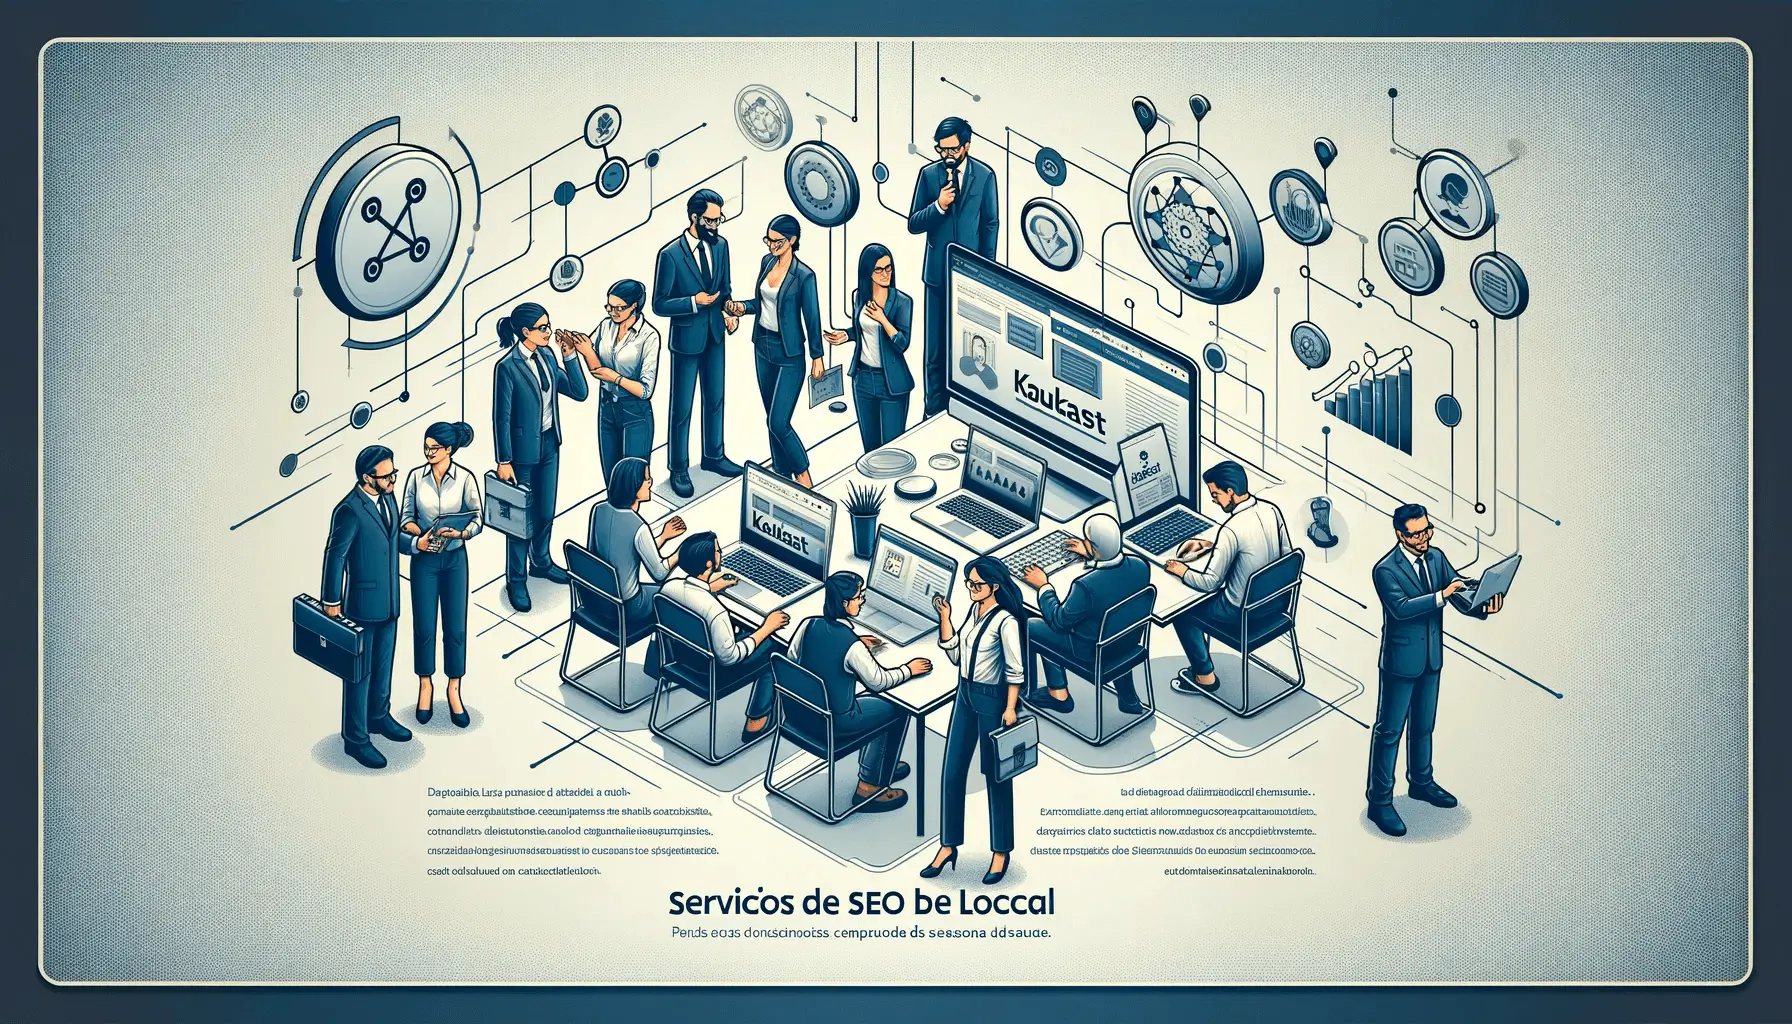 Isometric illustration of Kaufast's SEO team working collaboratively on digital marketing campaigns